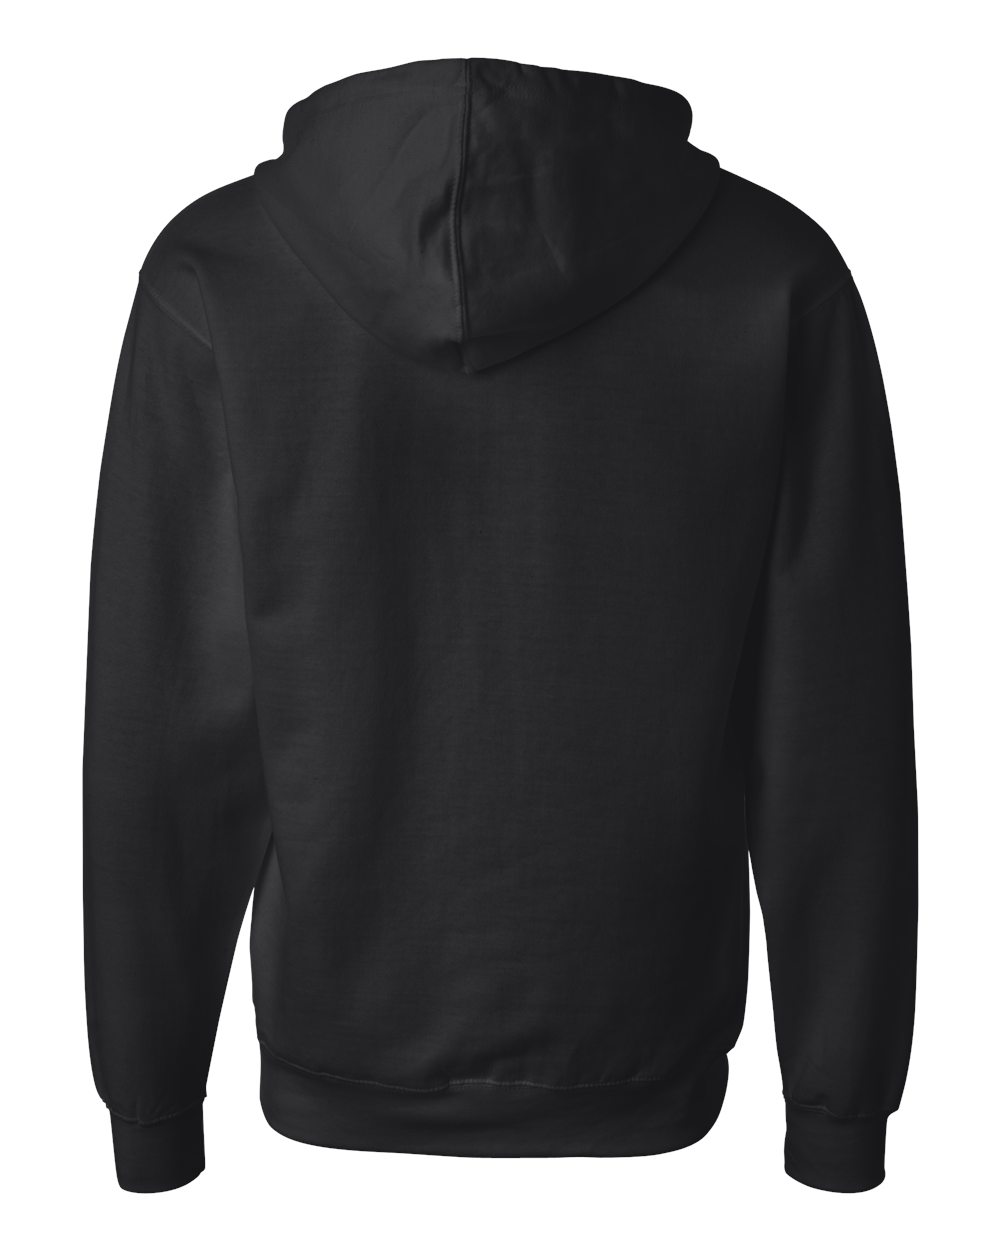 fully customizable independent midweight zipper hoodie sweater pullover in multiple sizes and colors